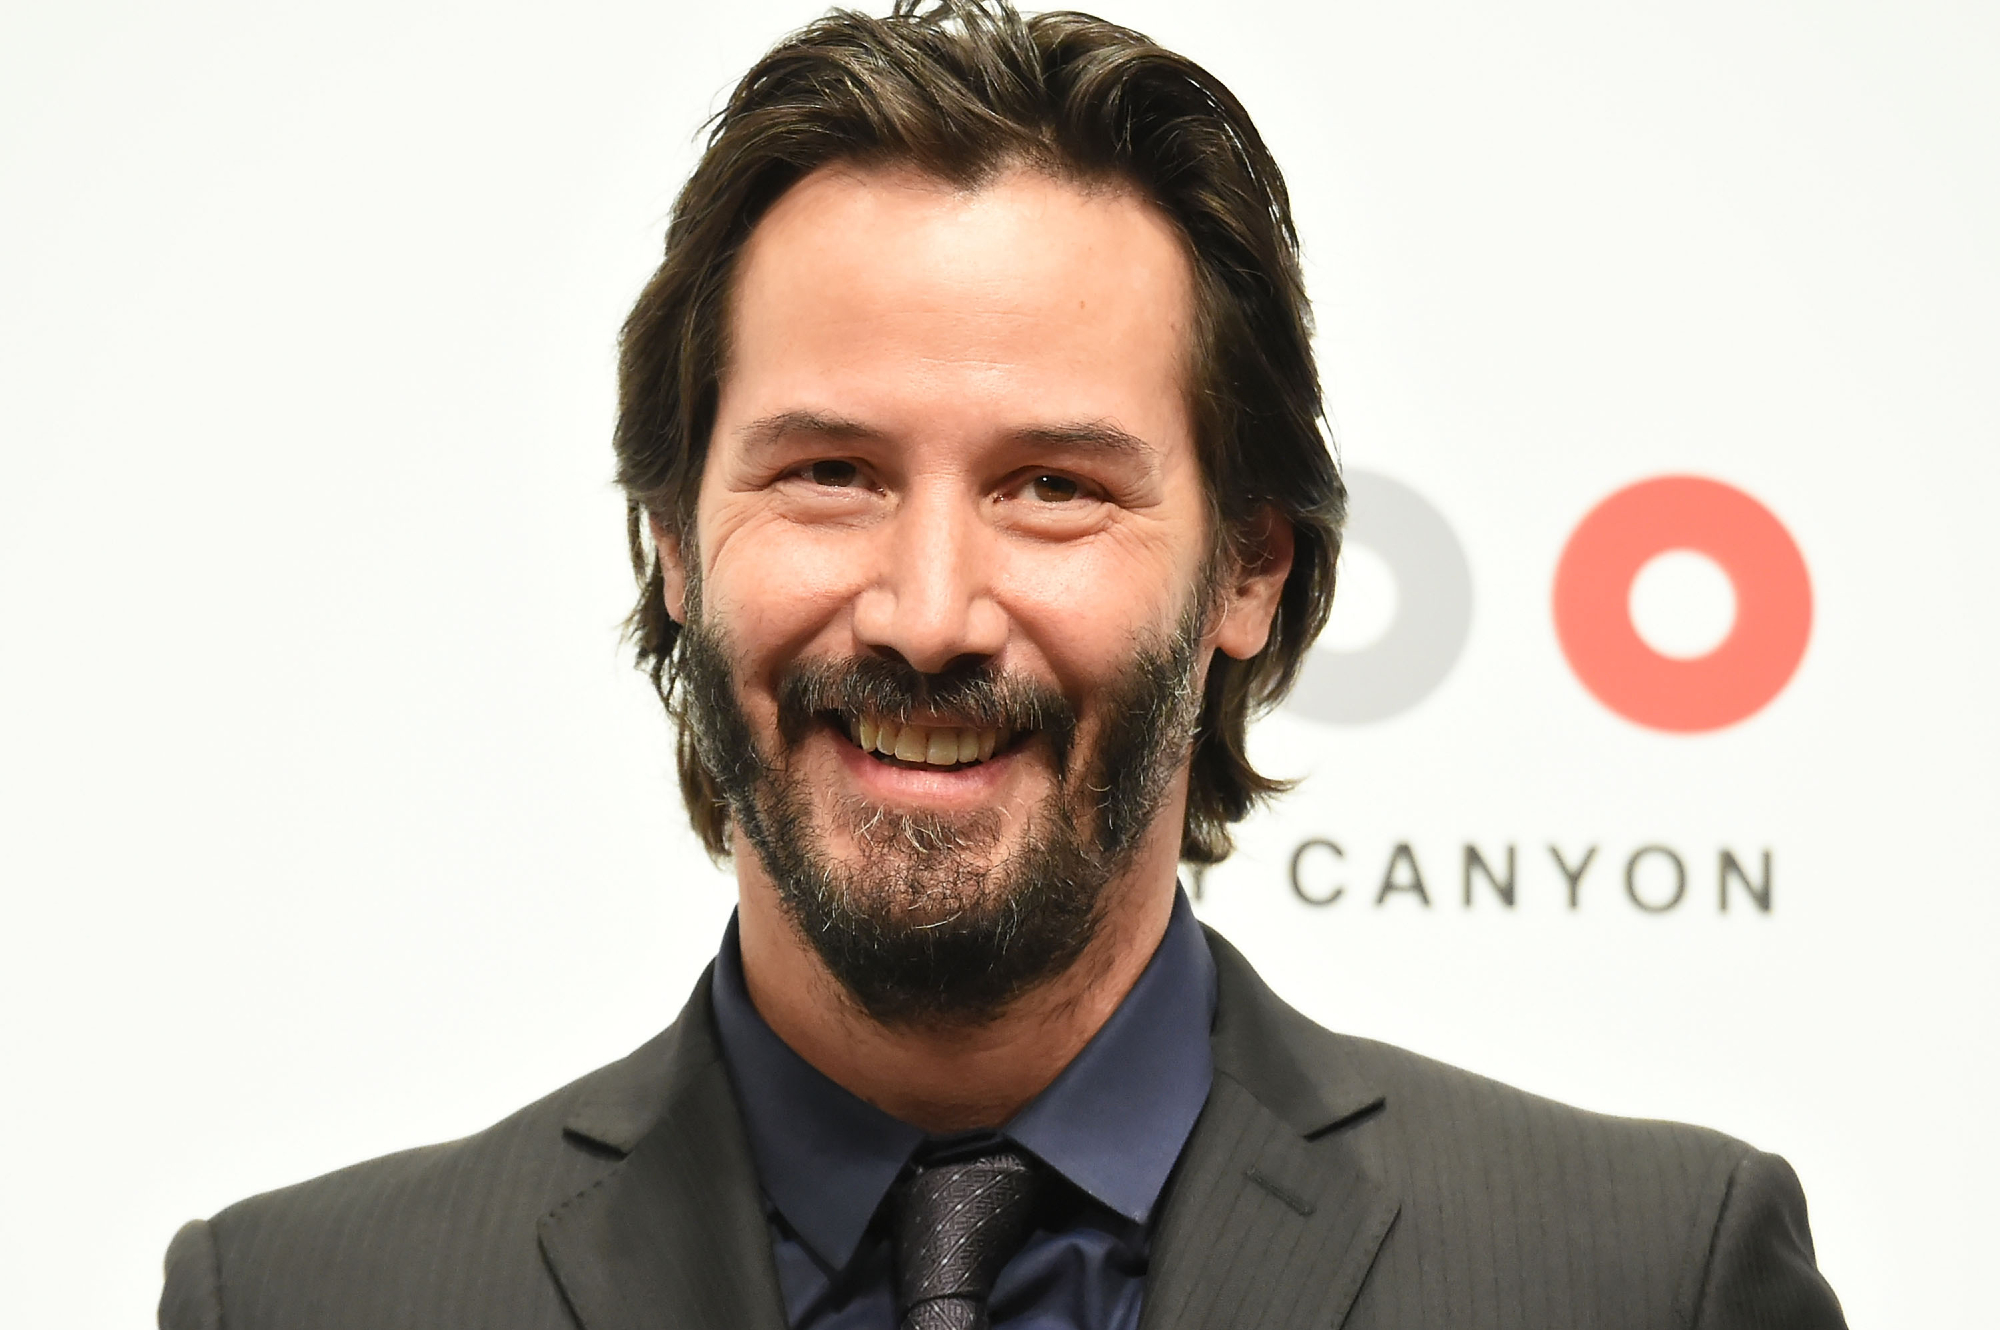 'John Wick 4' star Keanu Reeves smiling in a black suit in front of a step and repeat